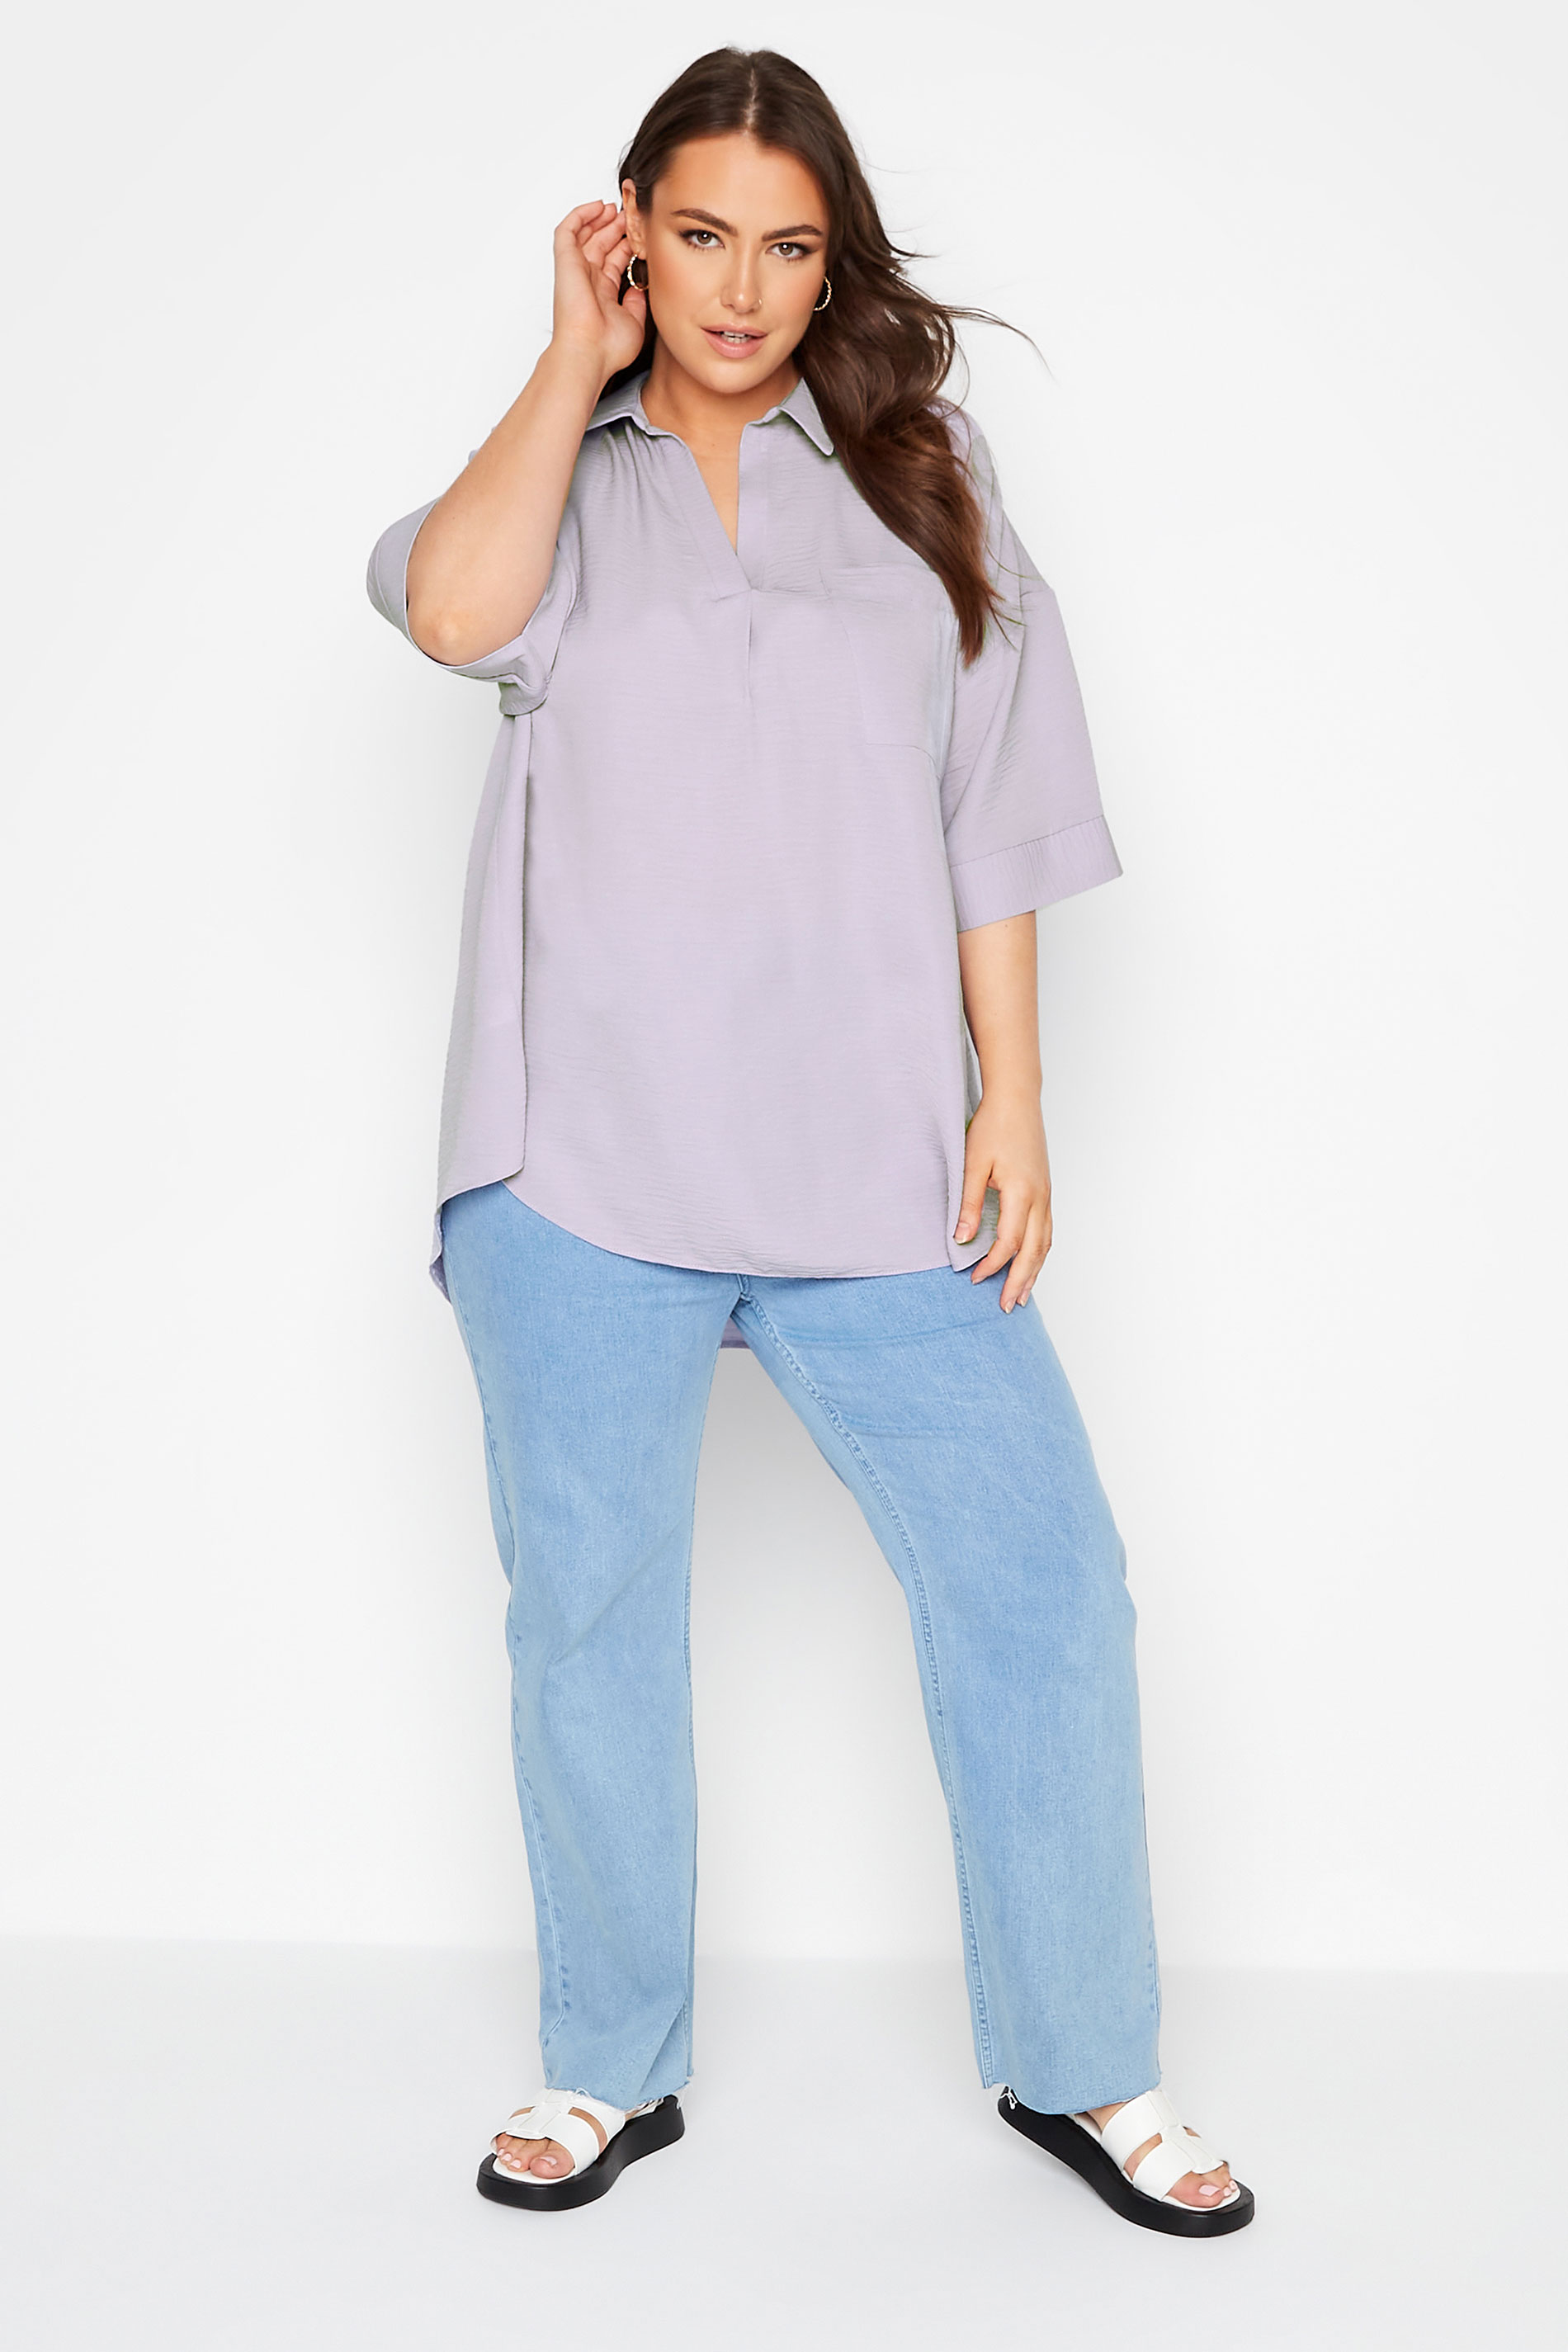 LIMITED COLLECTION Plus Size Lilac Purple Shirt | Yours Clothing 3